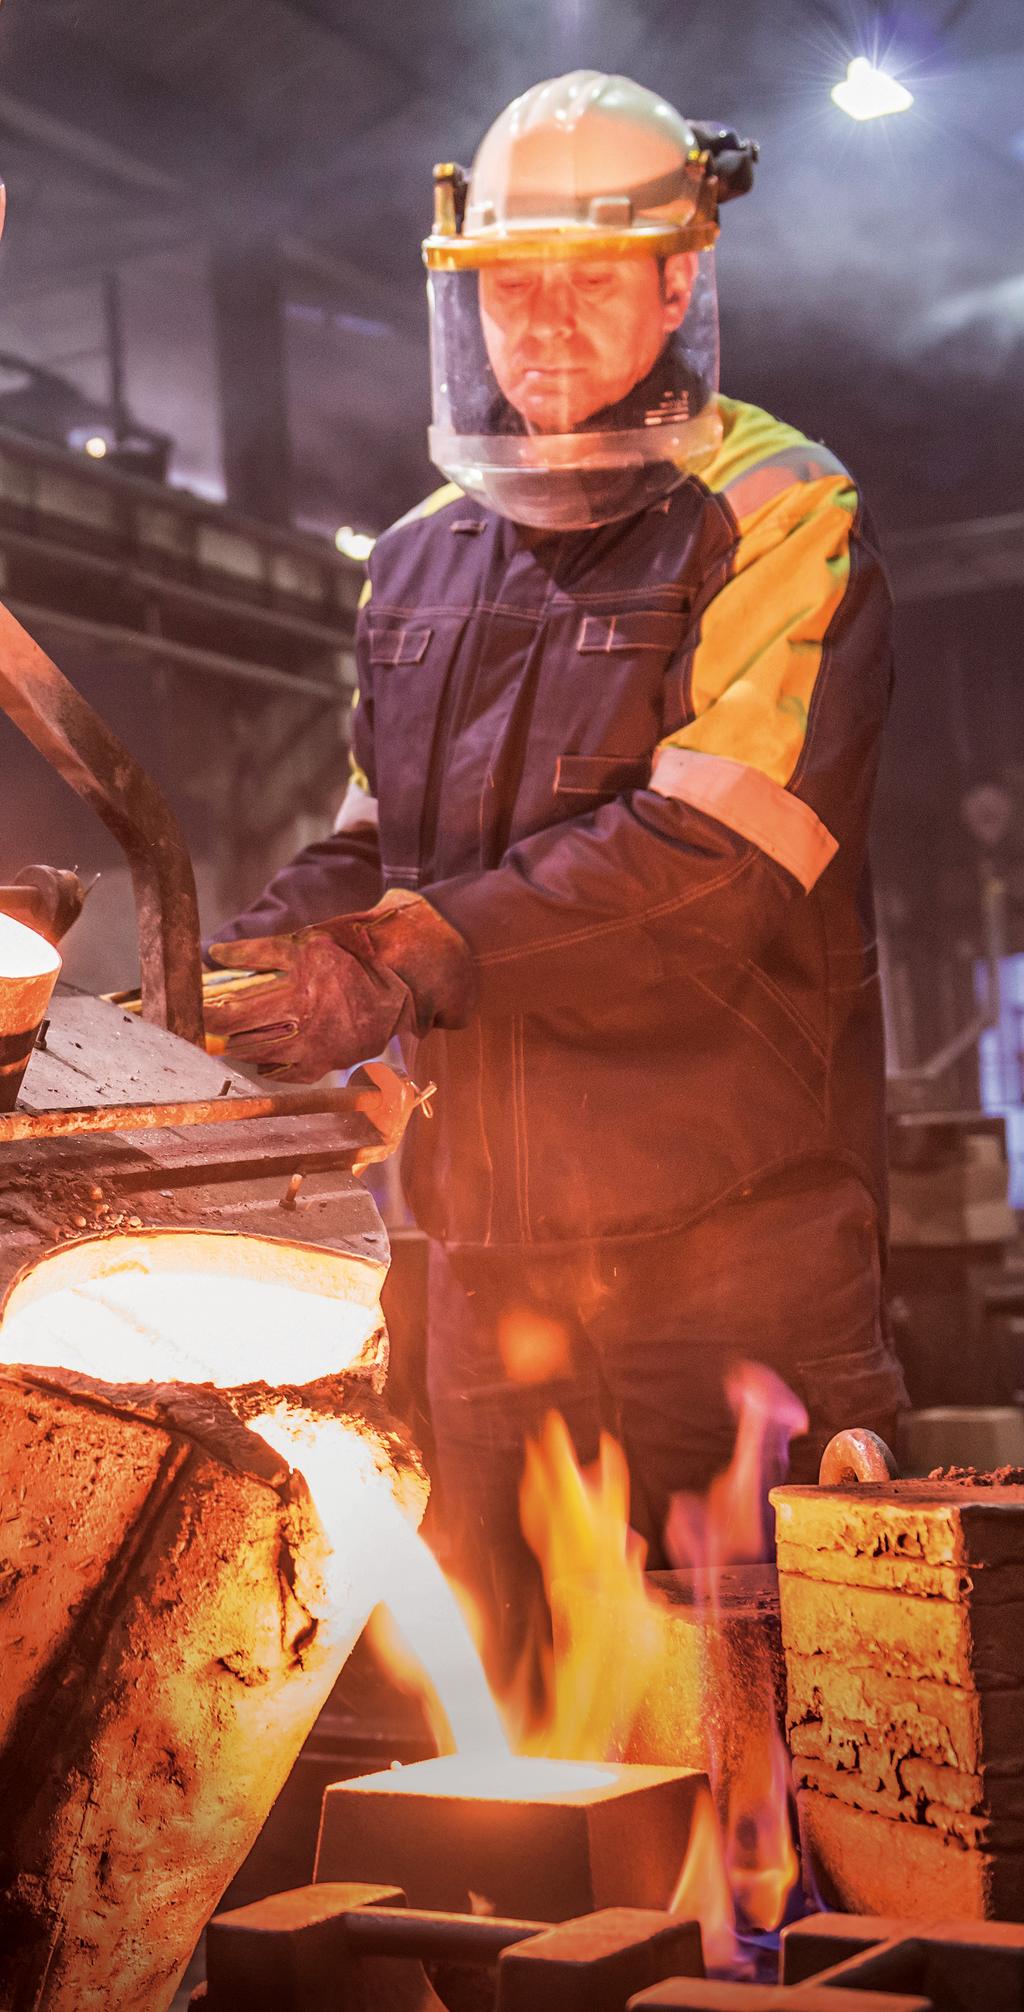 Challenge #3: Worker fatigue and safety Challenge: Worker fatigue can lead to unsafe work environments. Worker fatigue is one of the many potential hazards present in a foundry work environment.